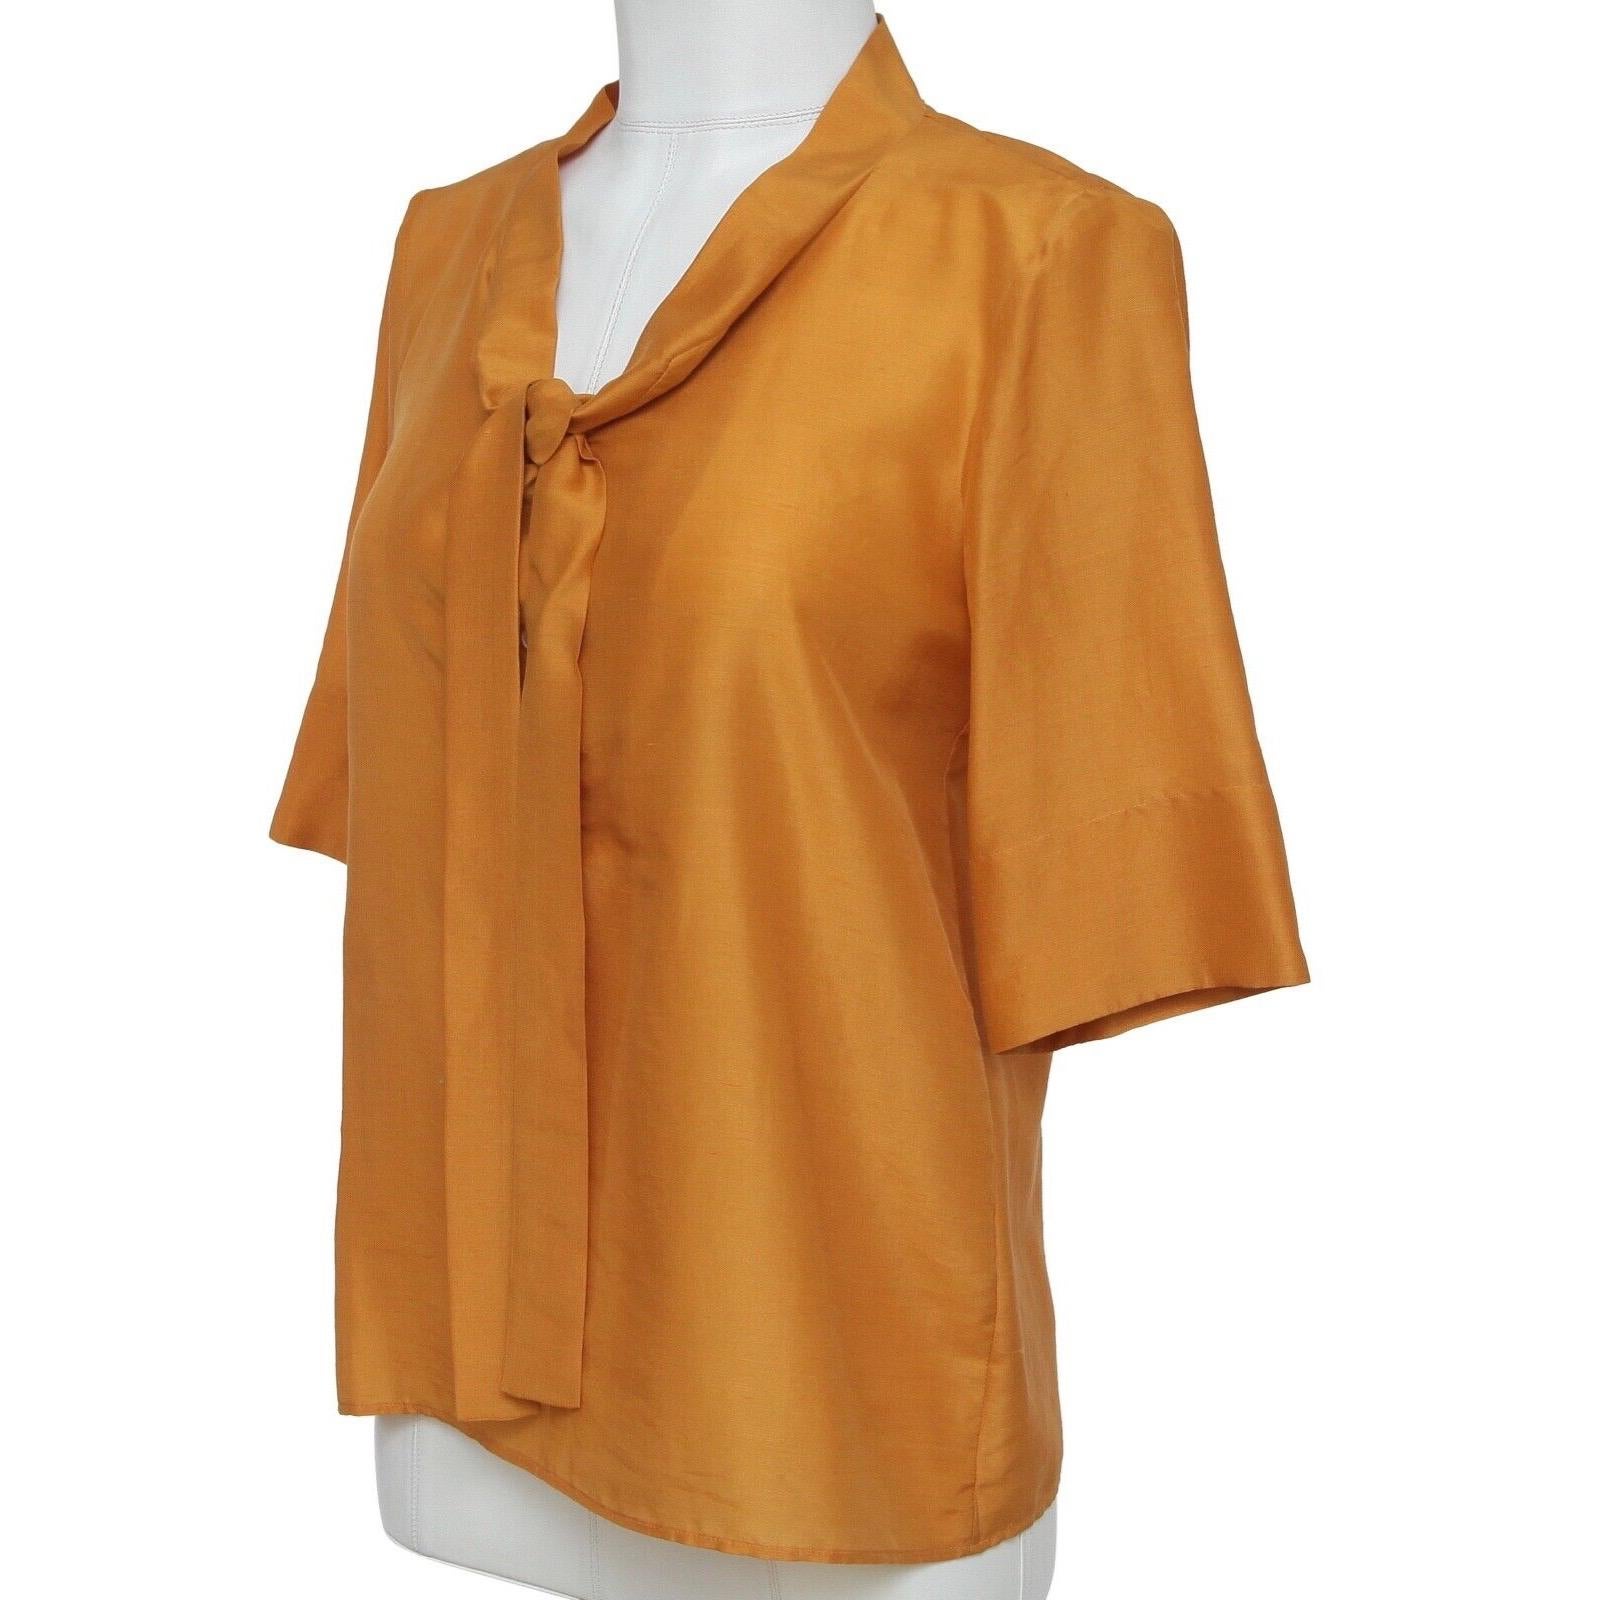 CHLOE Blouse Shirt Marigold Yellow Orange Silk Short Sleeve Sz 36 Fall 2007 In Good Condition For Sale In Hollywood, FL